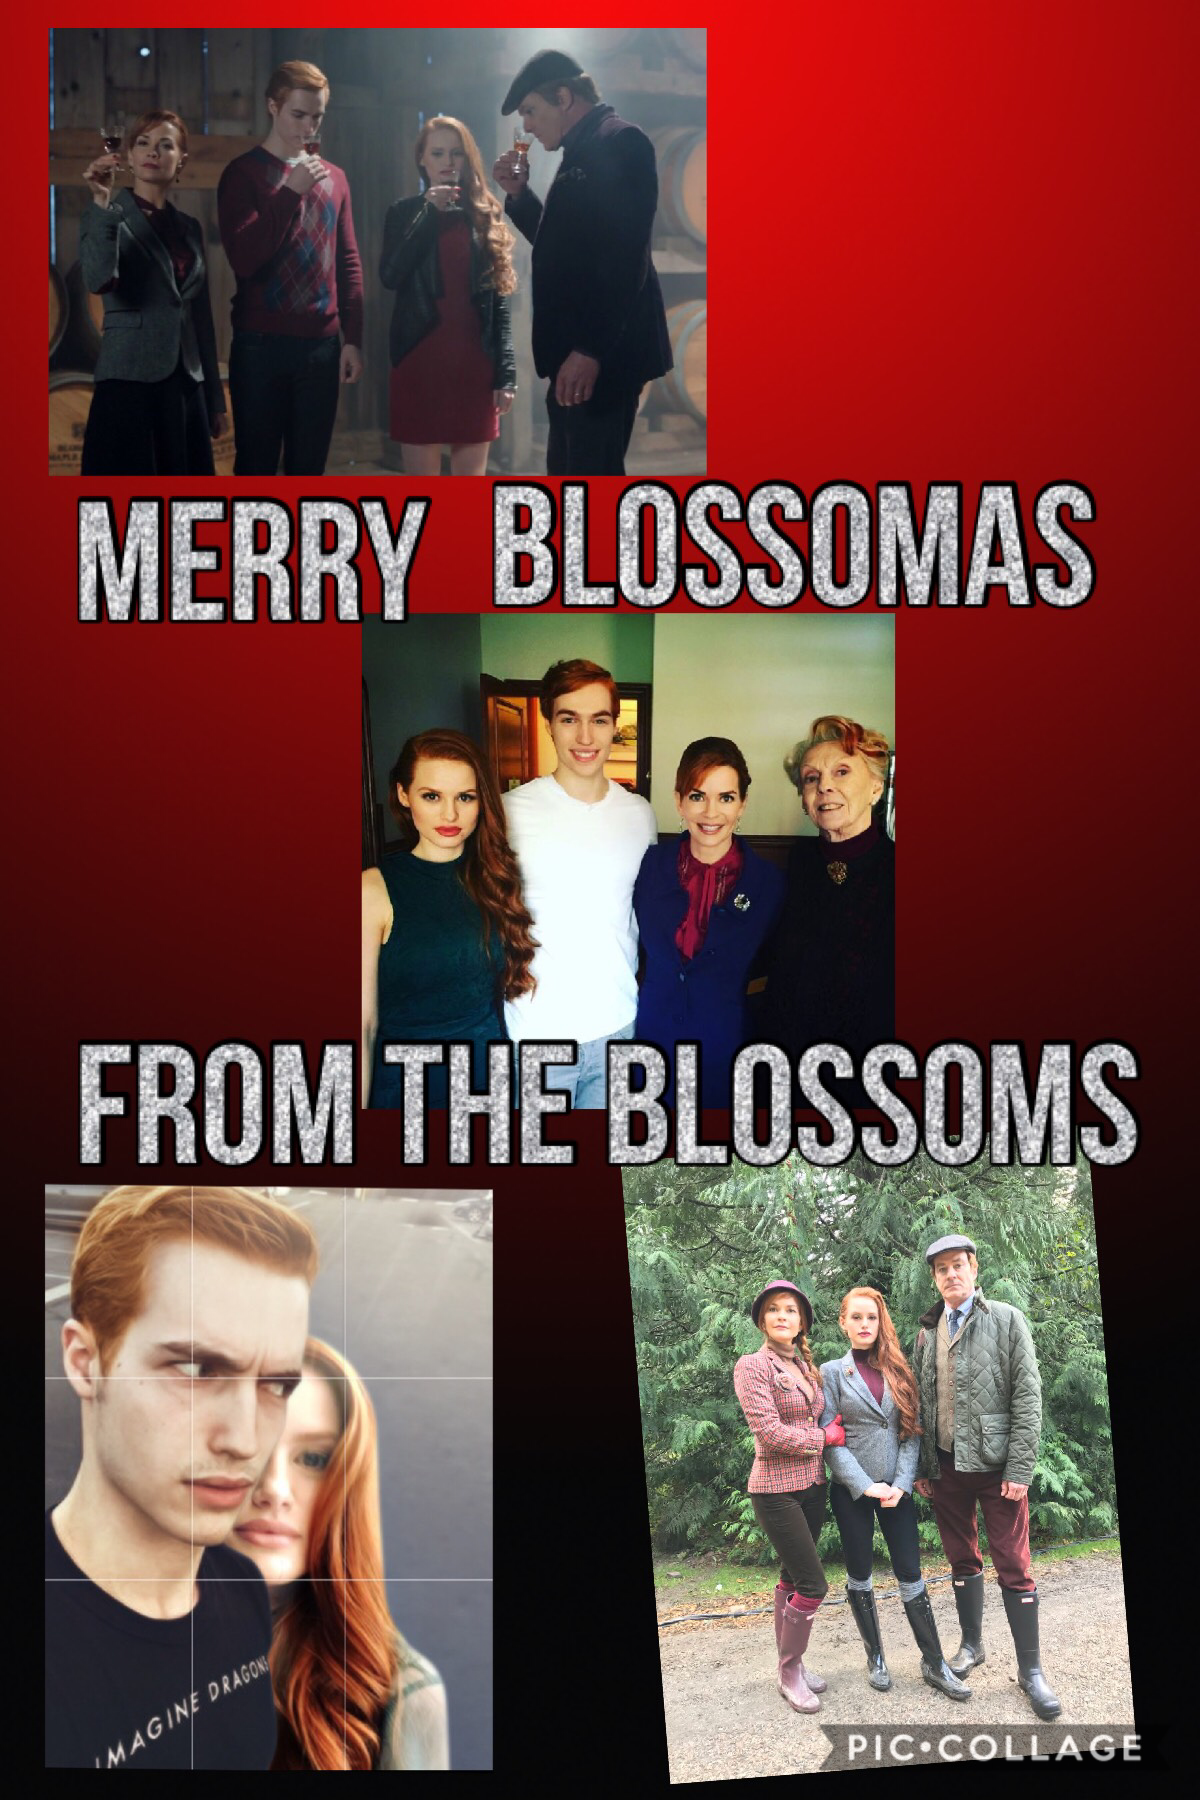 Riverdale Christmas collage blossoms edition 